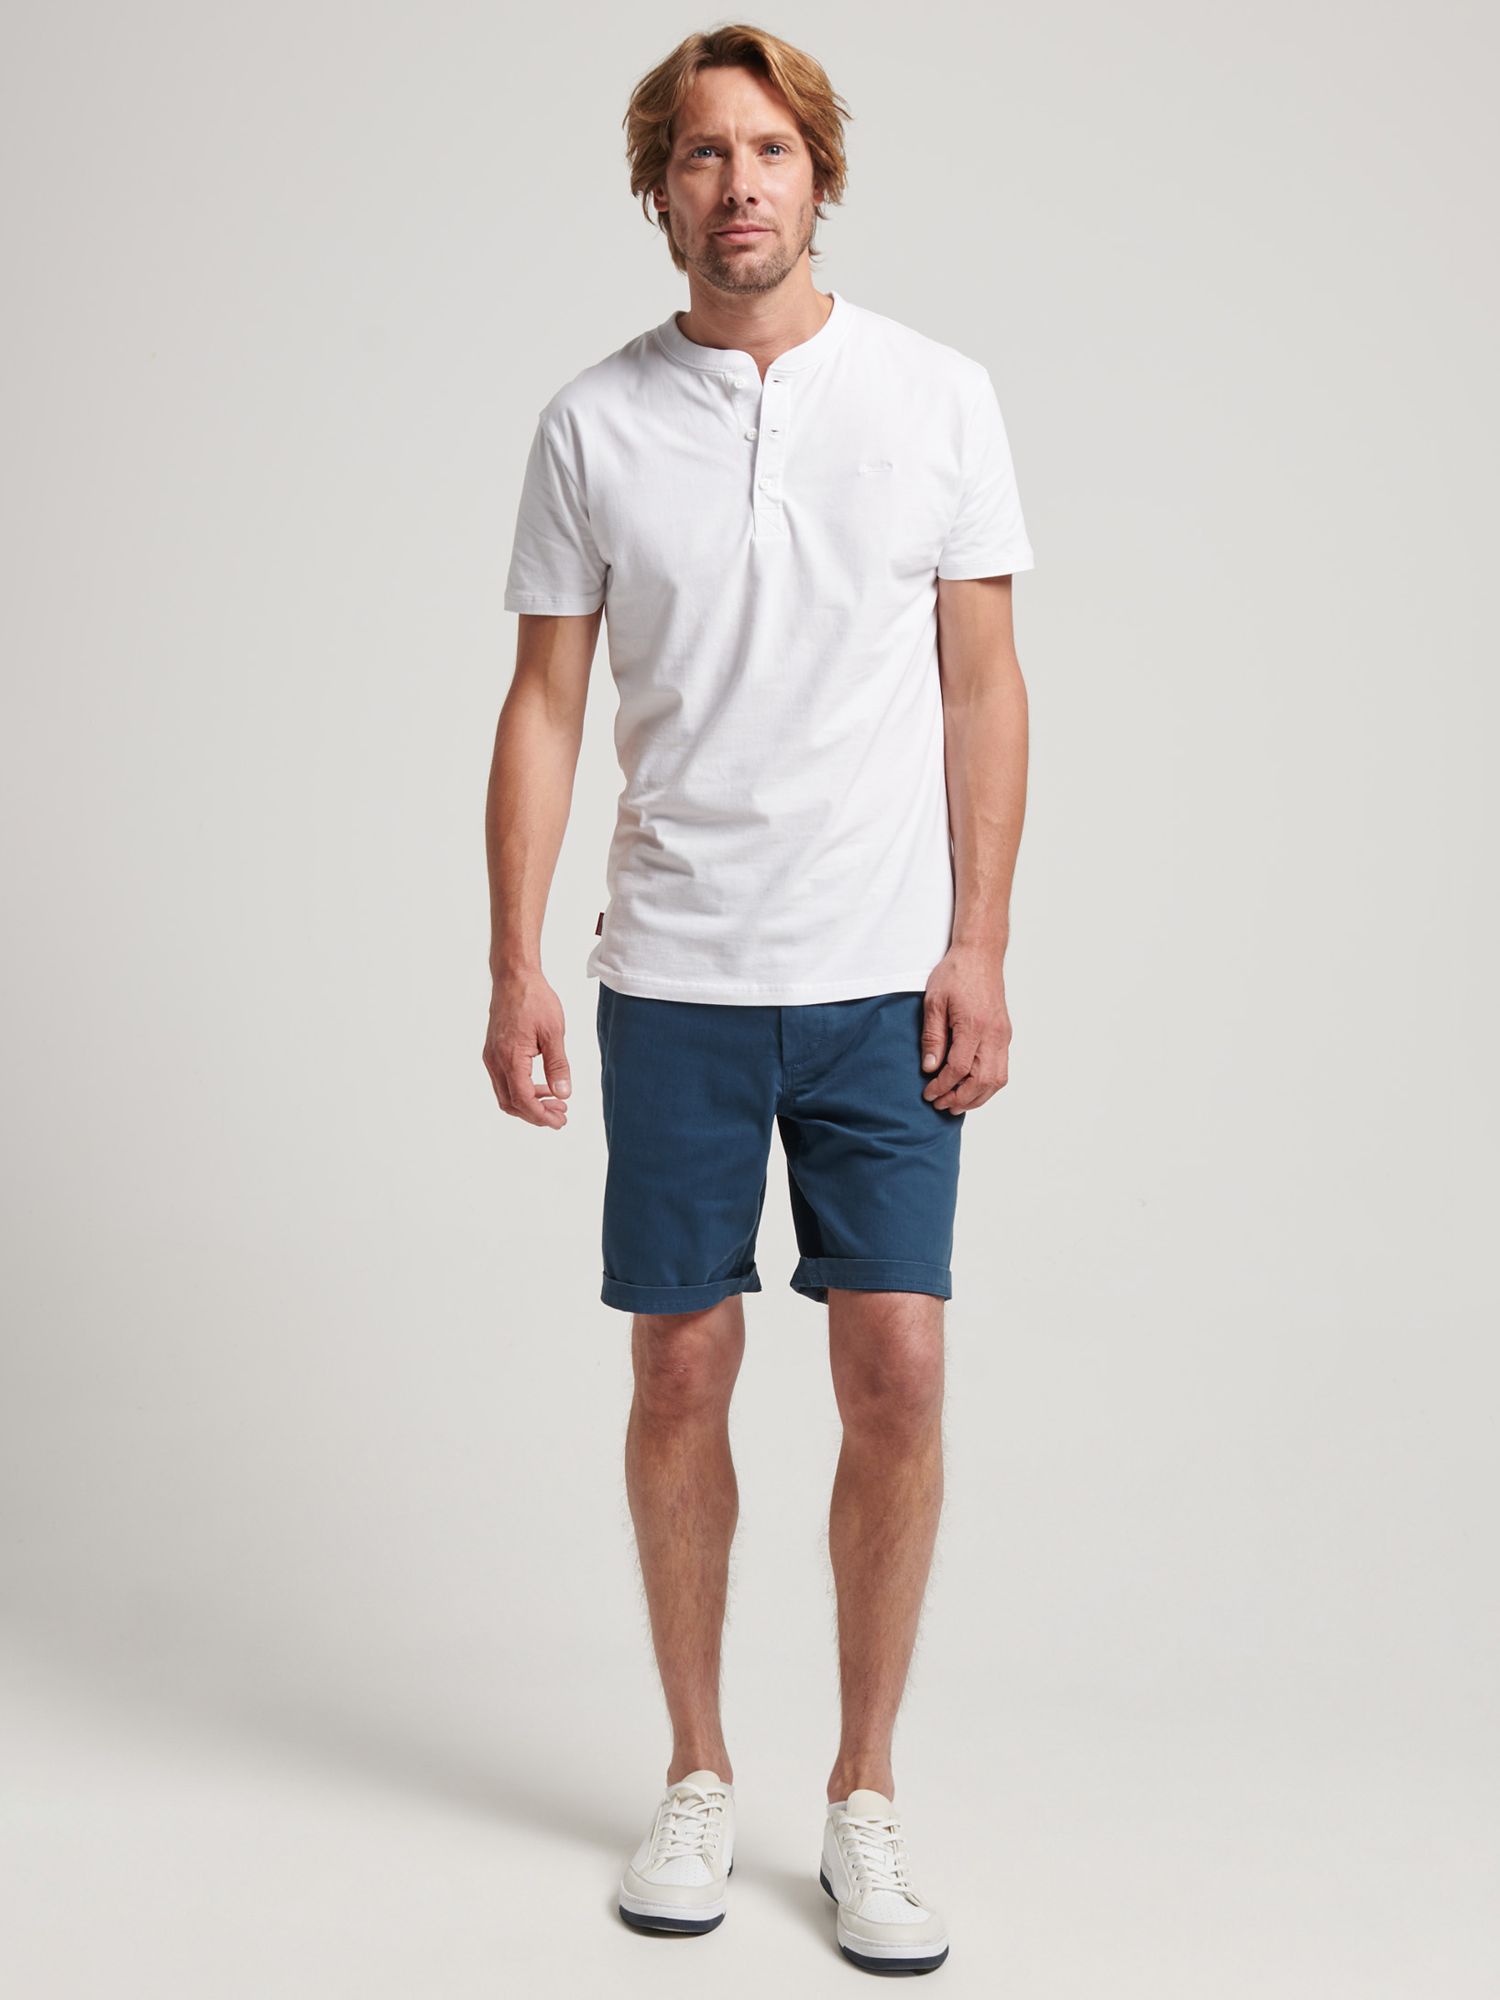 Superdry Officer Chino Shorts, Blue Bottle, 28R